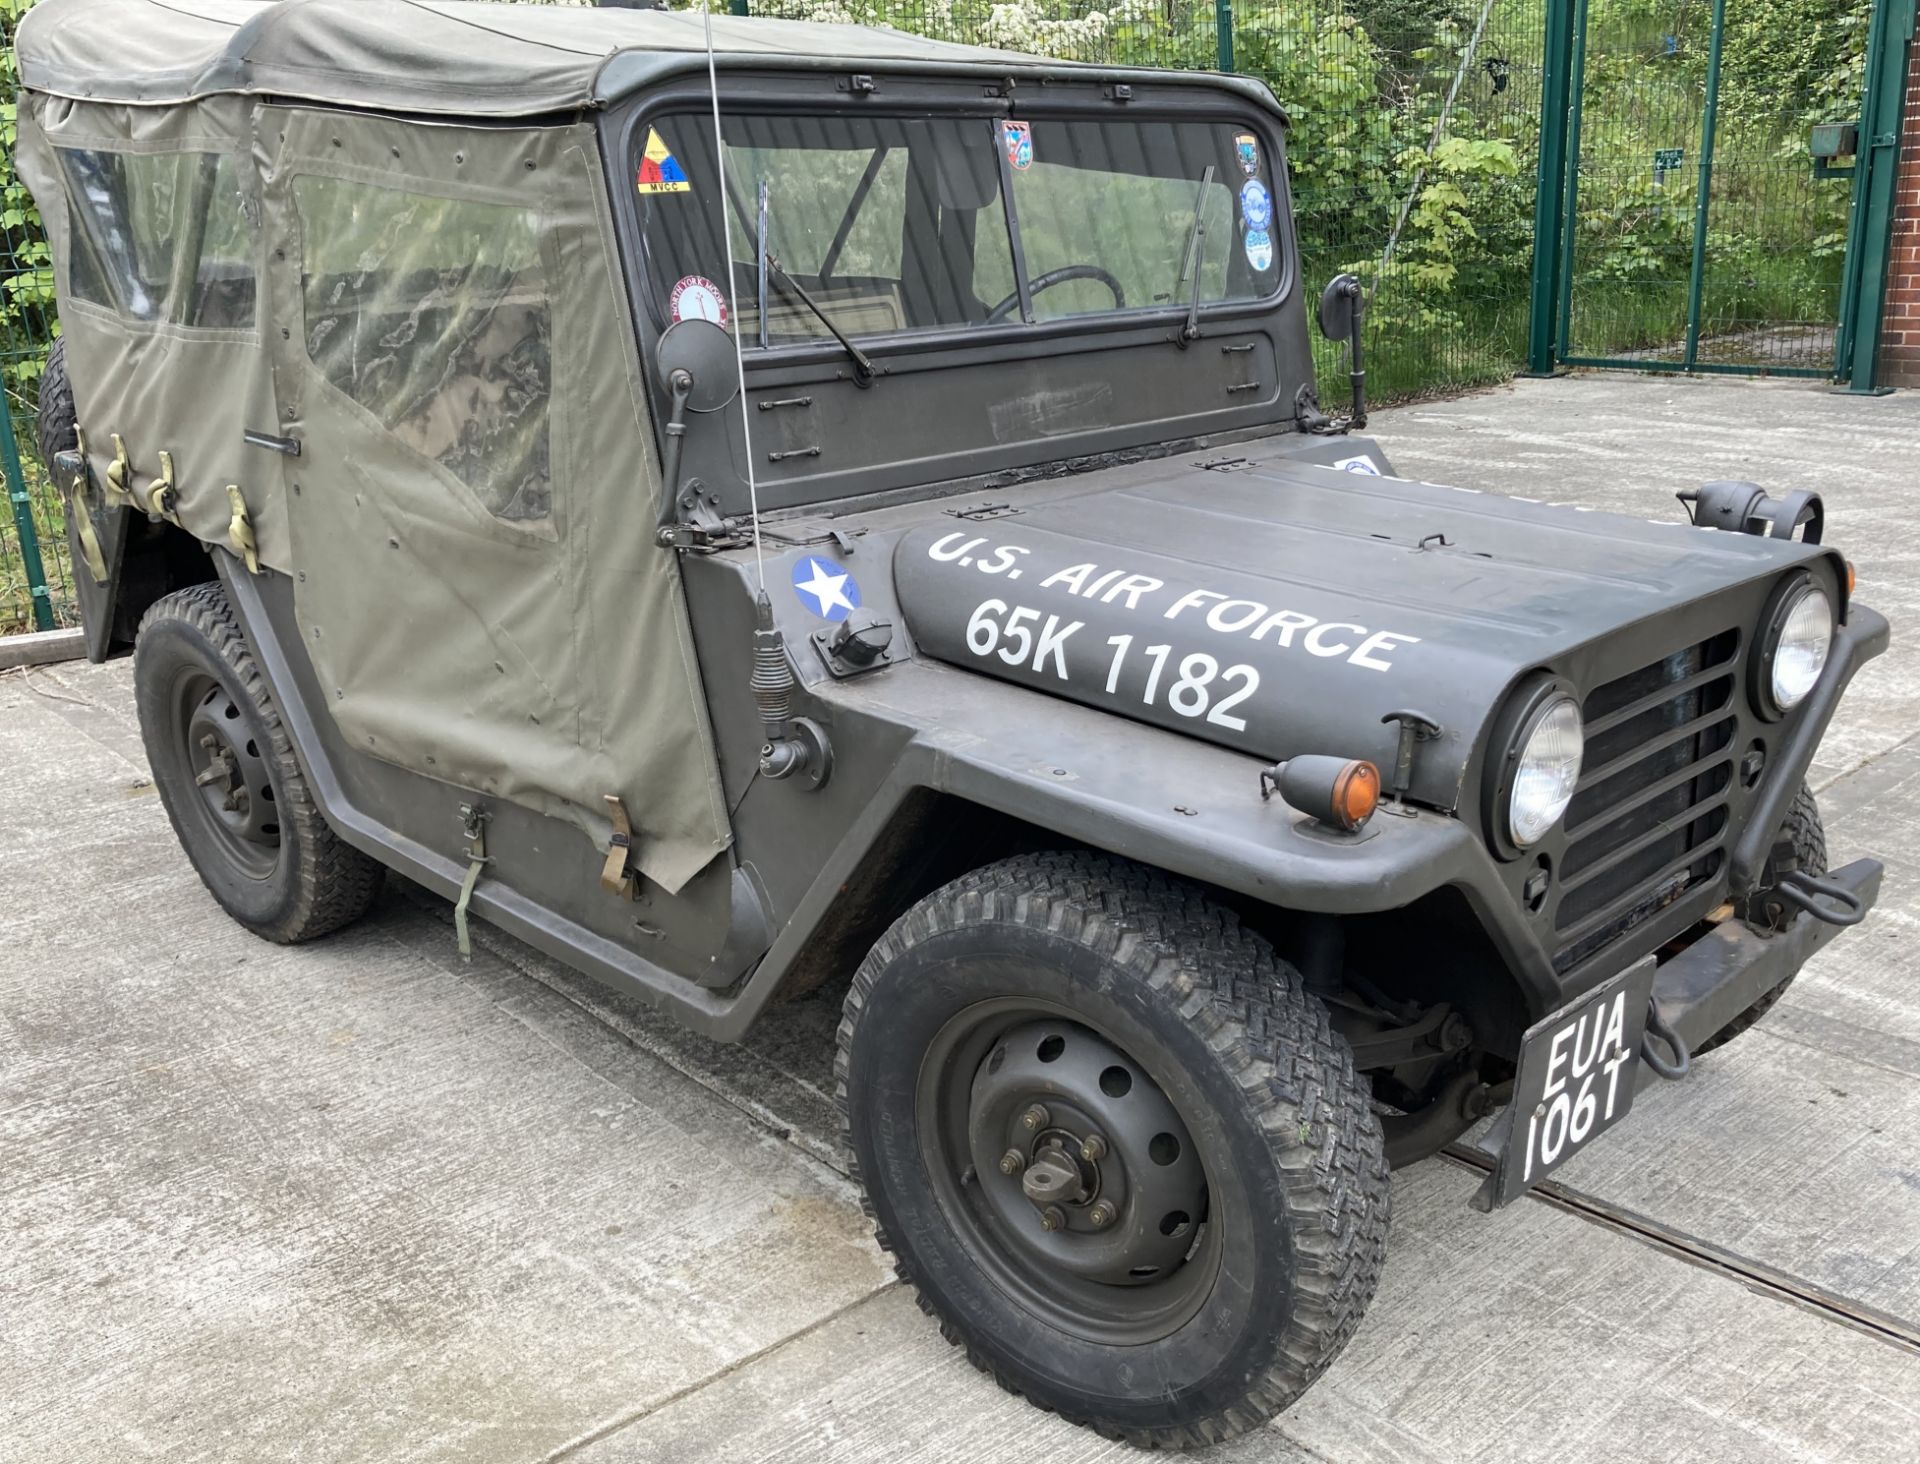 A FORD M151 (WILLYS) 1/4 TON 2.2 LIGHT 4X4 UTILITY JEEP - Petrol - Green - Ex USA Air Force. - Image 7 of 28